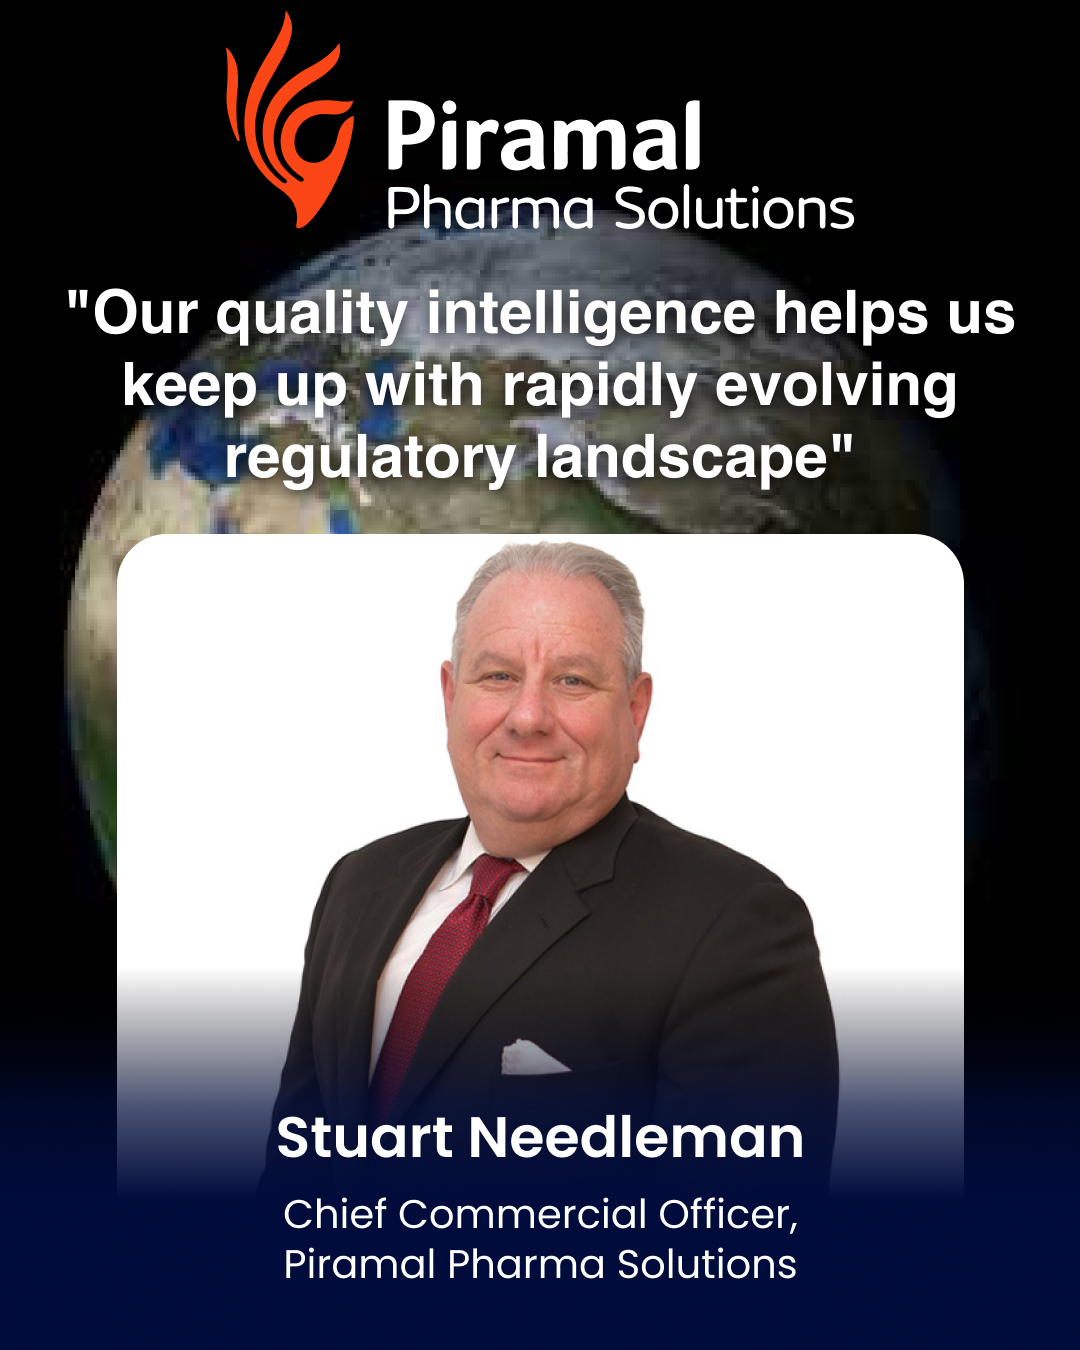 Our quality intelligence helps us keep up with rapidly evolving regulatory landscape